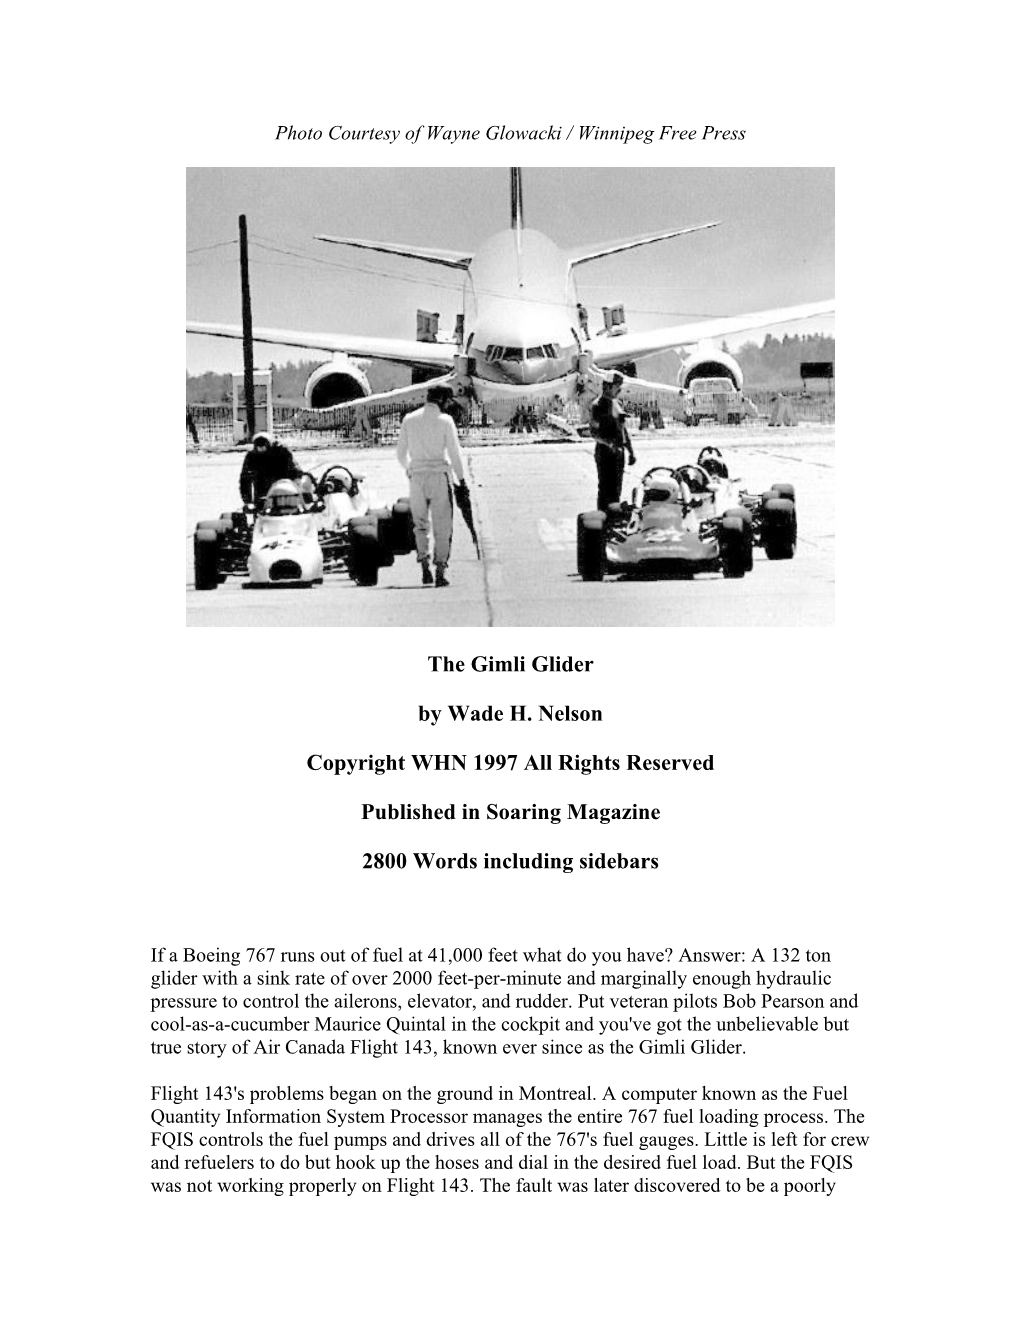 The Gimli Glider by Wade H. Nelson Copyright